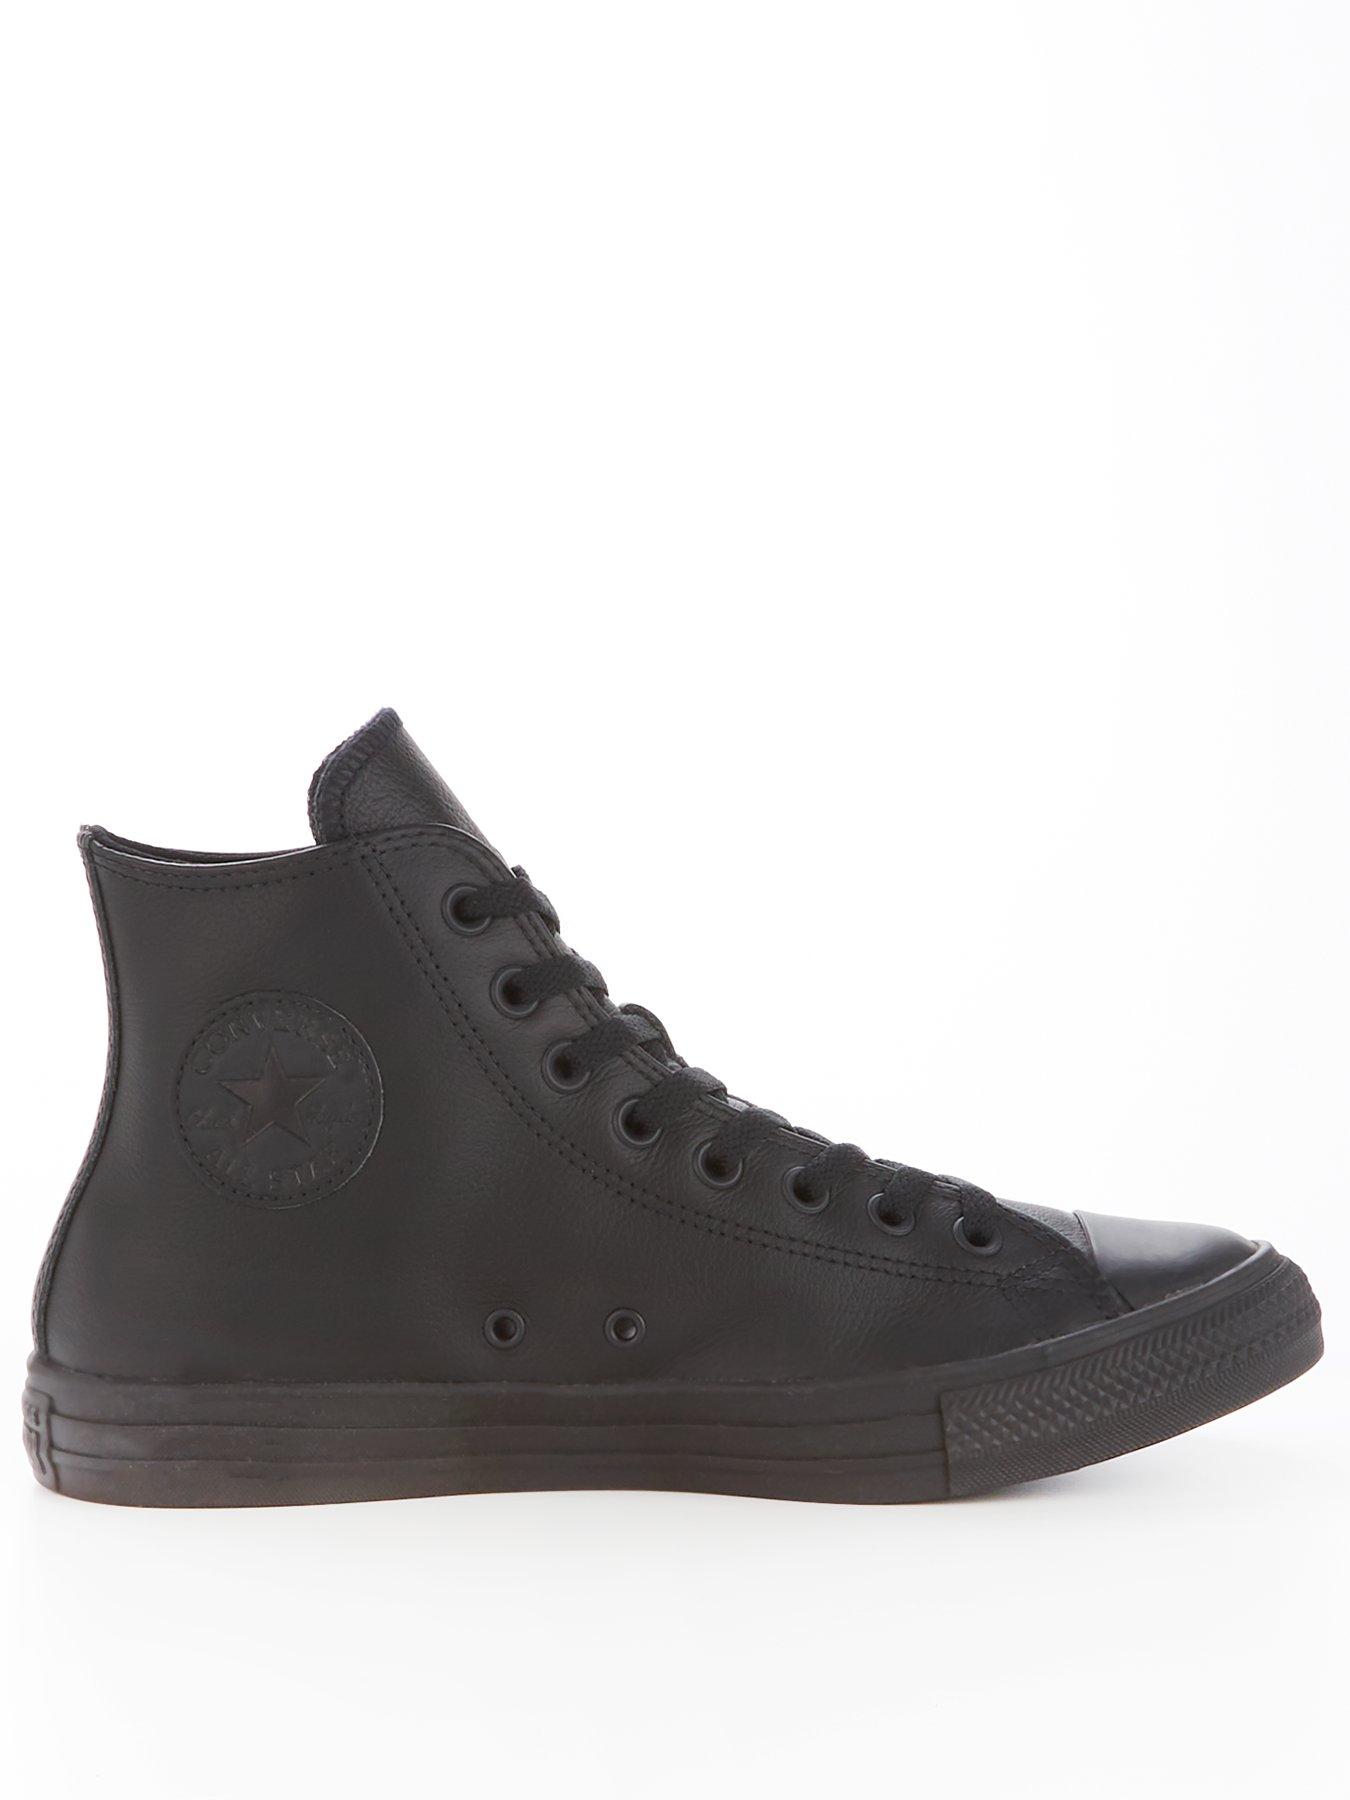 converse chuck taylor all star leather high top